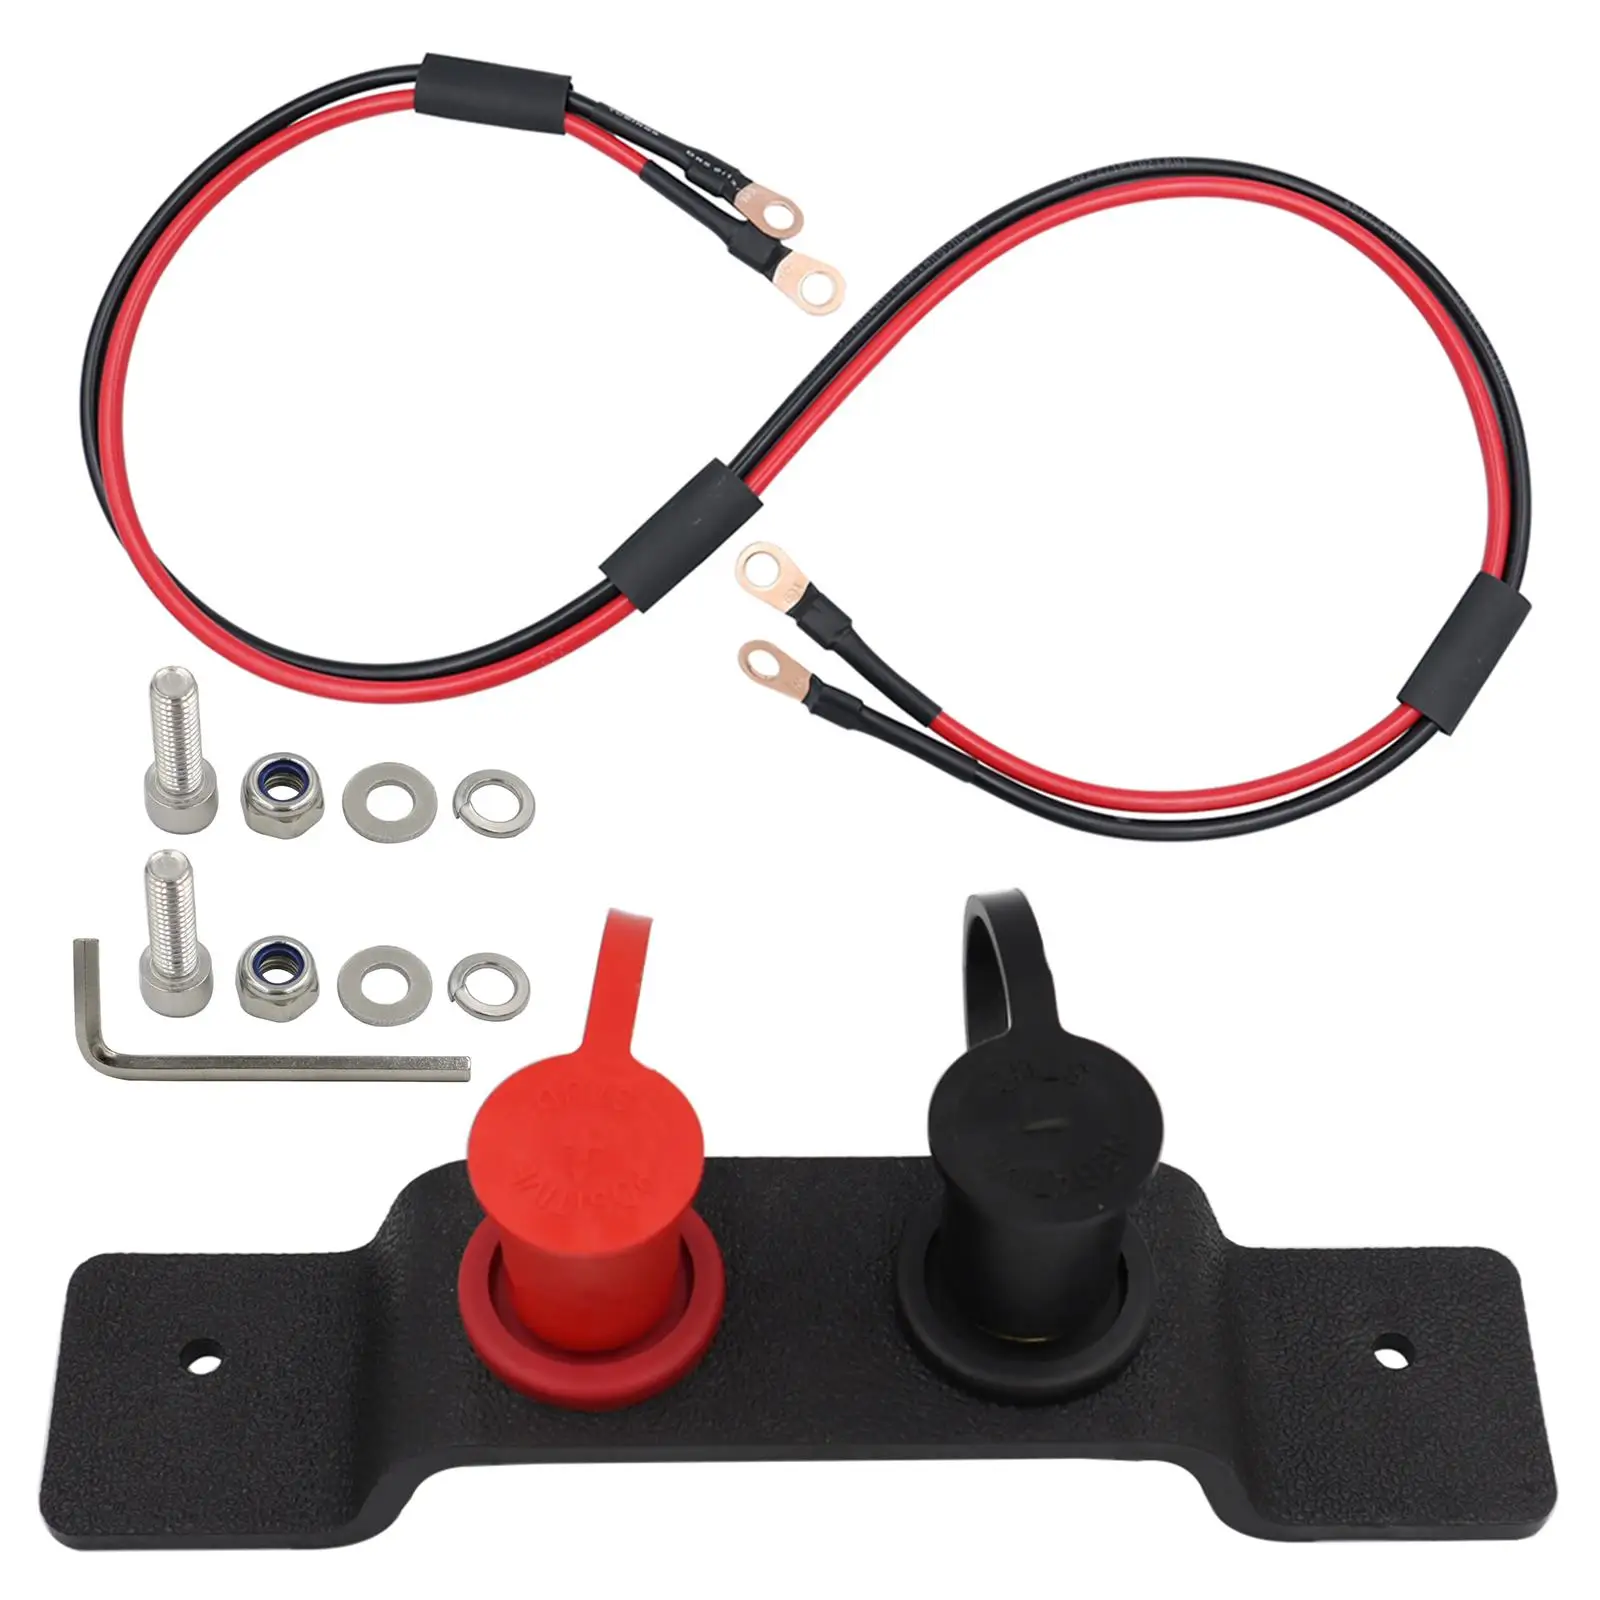 Battery Jump Post Starter Battery Terminals Relocation Kit Quick Easy Charging for Polaris RZR Lawn Mowers Diesel Engines